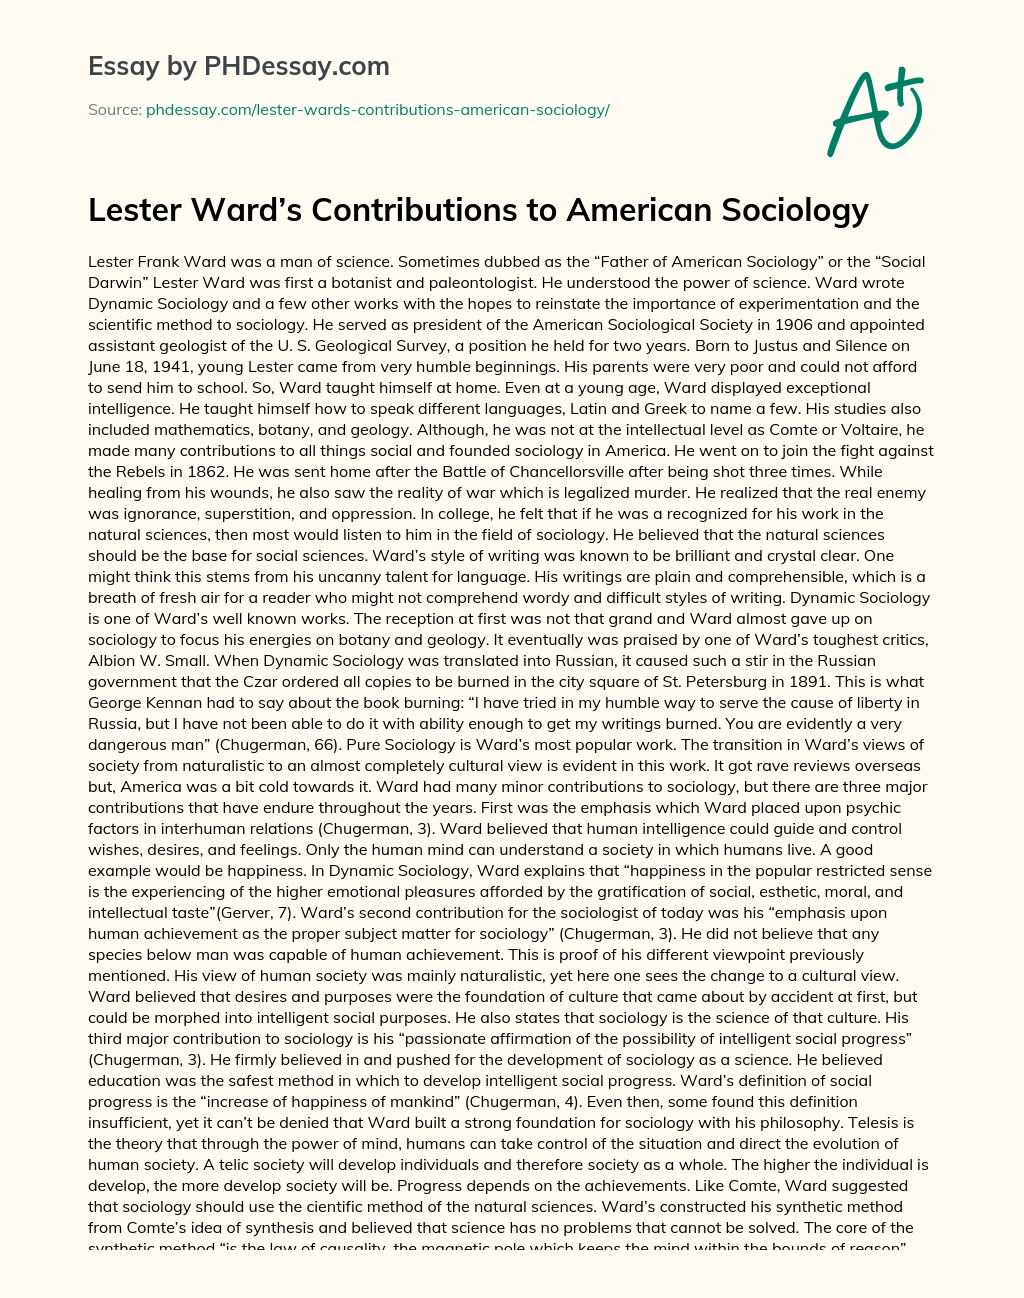 Lester Ward’s Contributions to American Sociology essay